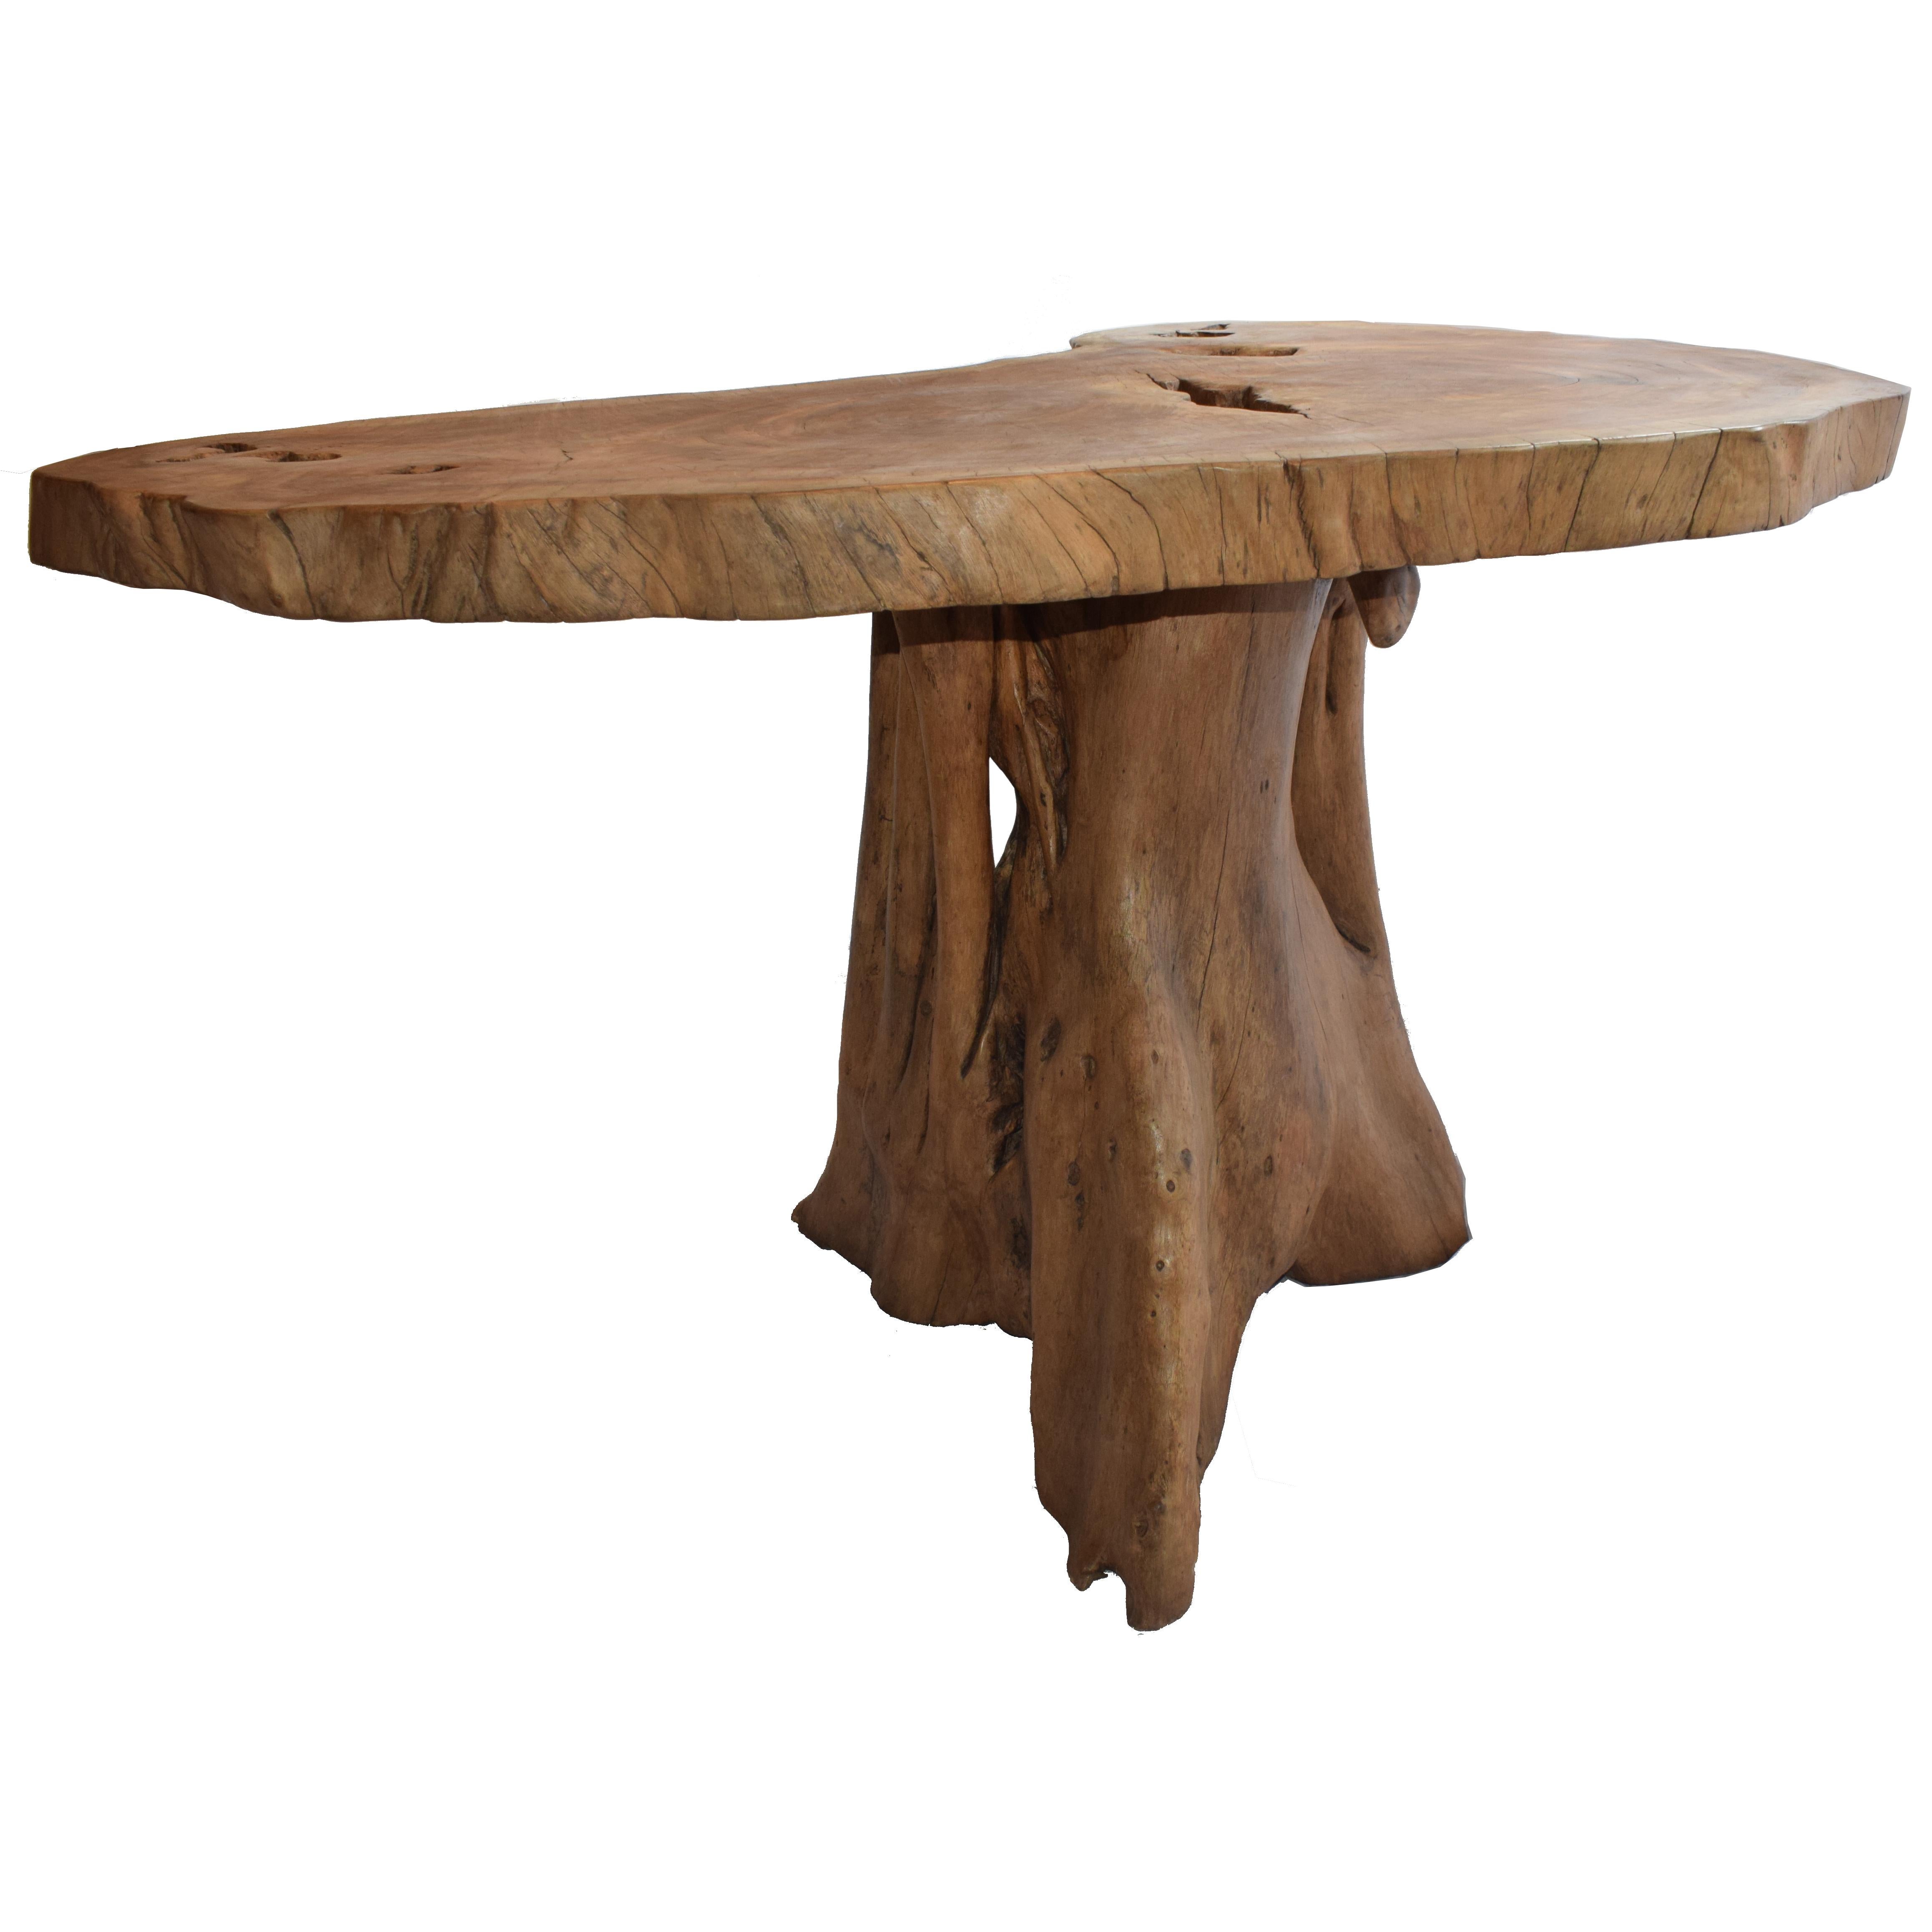 Portrait of Africa Table
 
The `Portrait of Africa` table has the shape of the continent of Africa.
Actually Mr. Erasmus, the artist who made this masterpiece found a log in the bush. He recognized the form of Africa in this log and cut of a slice